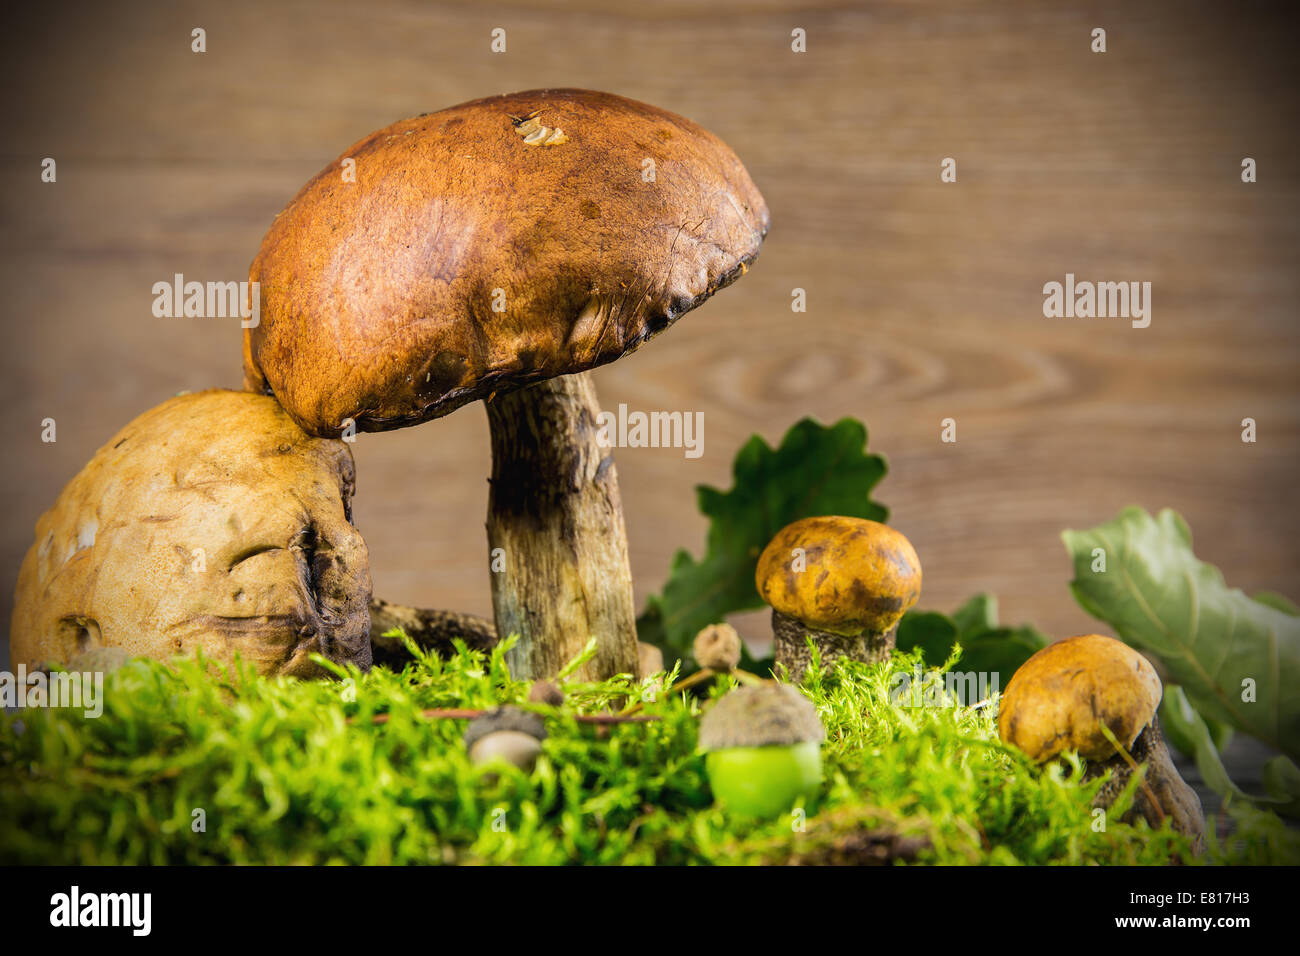 Fresh forest mushrooms against wooden background Stock Photo